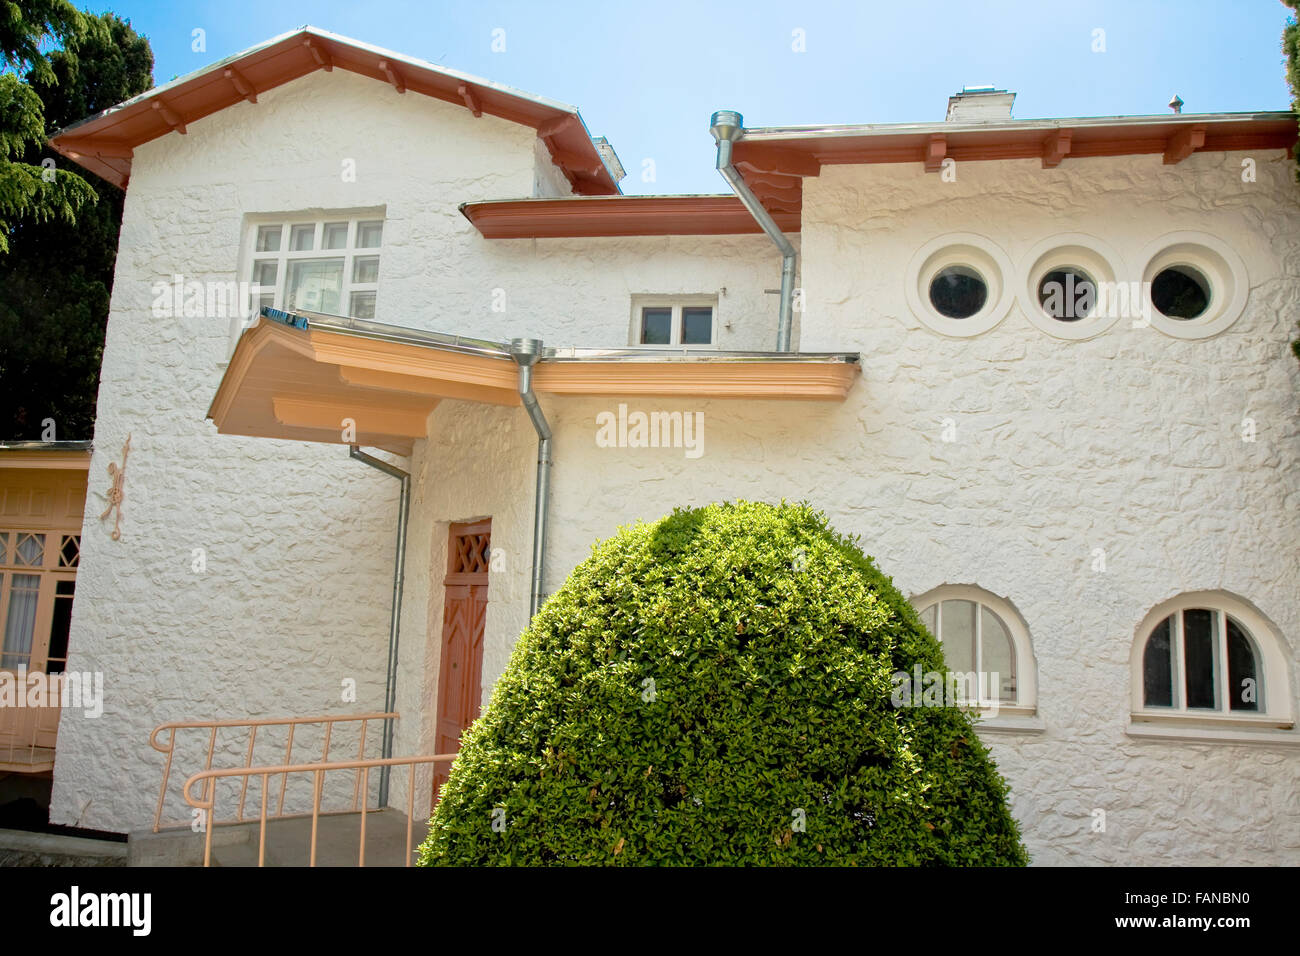 YALTA, UKRAINE - MAY 17: house-museum of Chekhov, where he lived in 1898-1904, May 17, 2012, in town Yalta, Ukraine, has been op Stock Photo